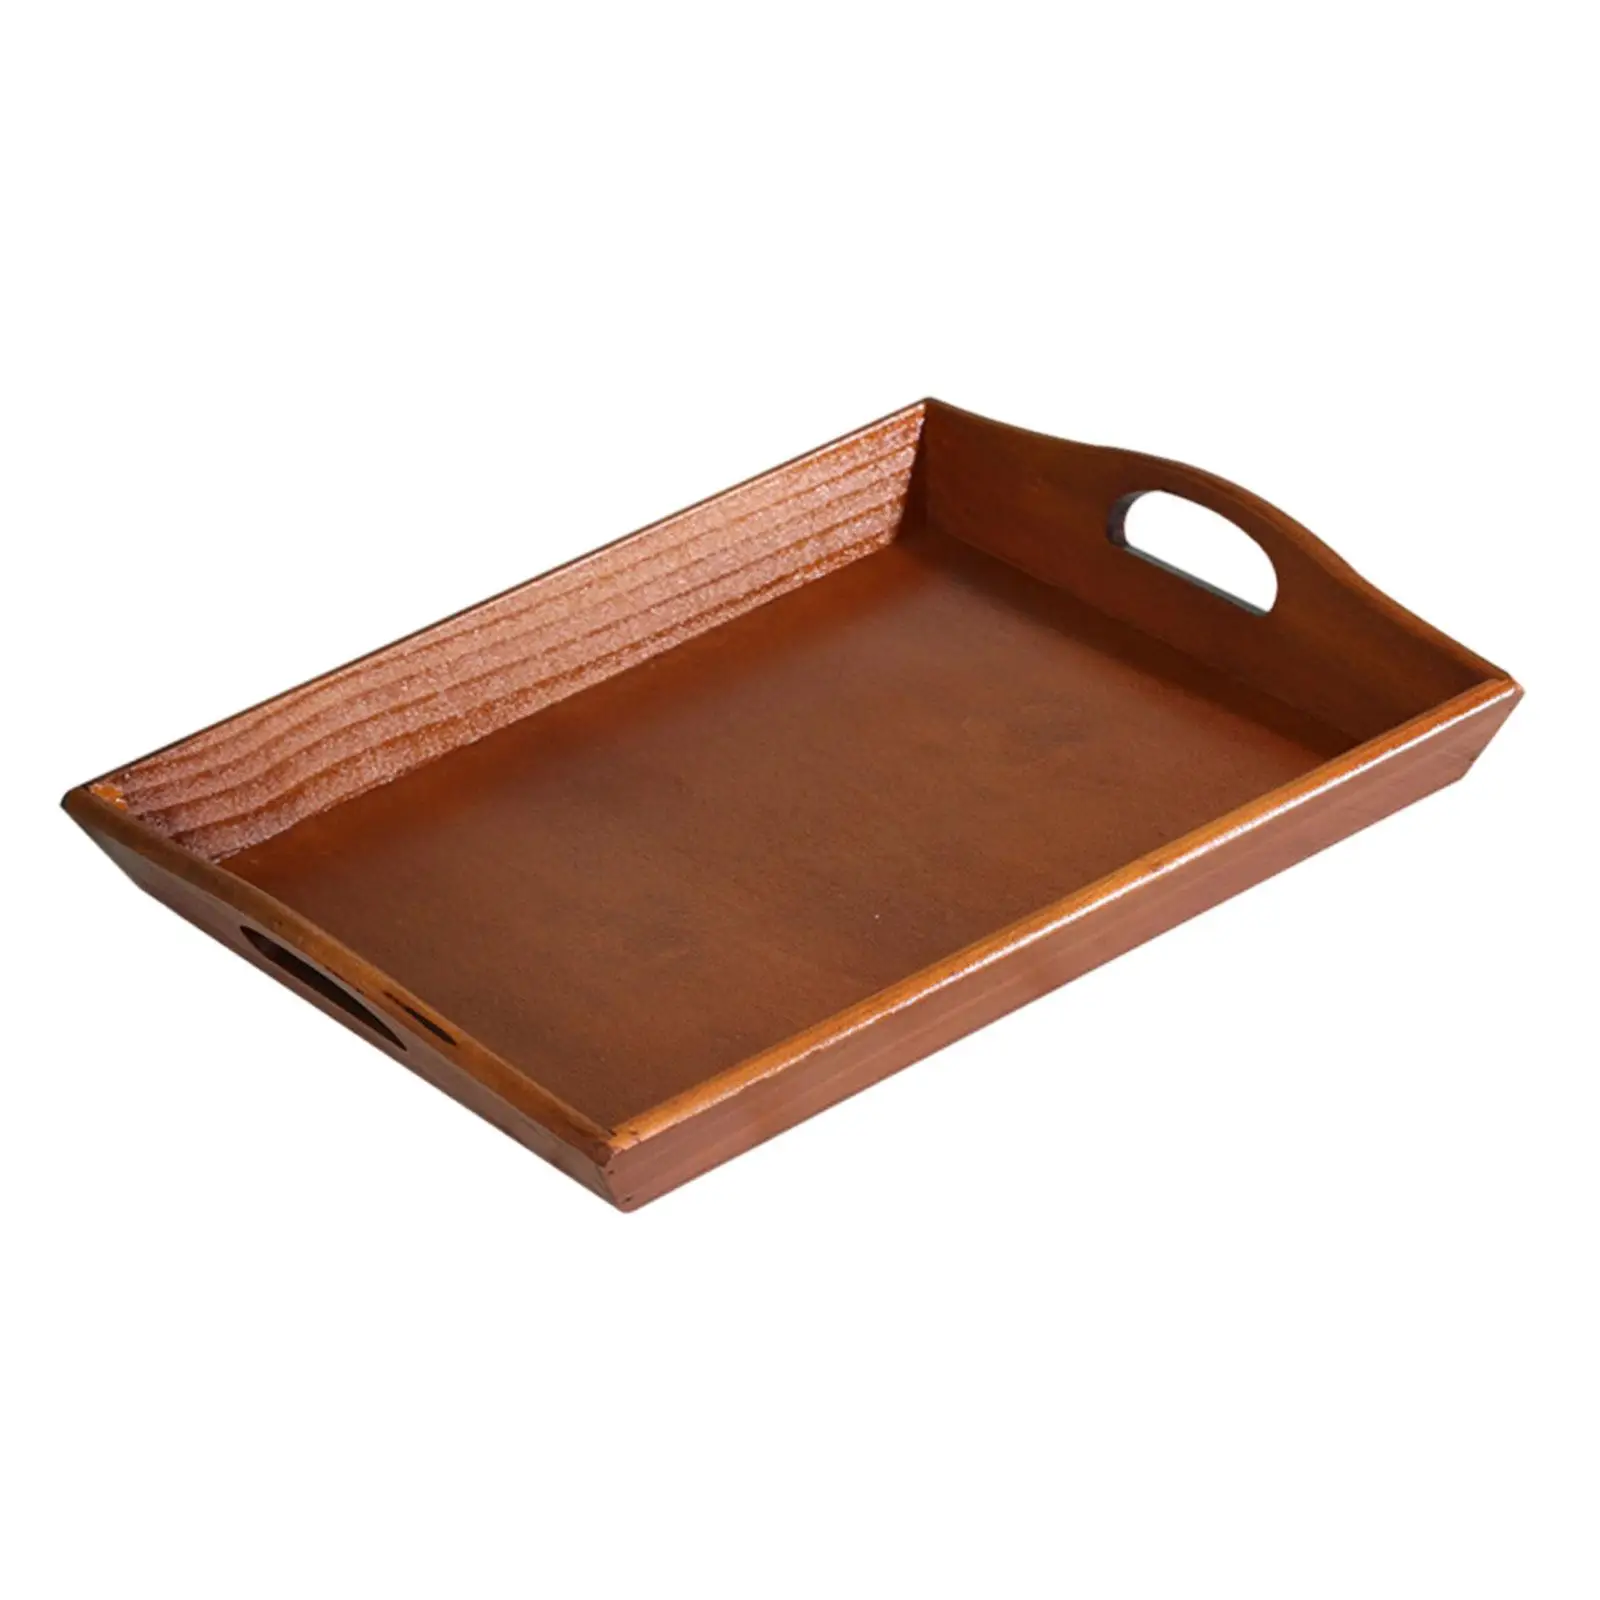 Rectangle Serving Tray Cake Stand Fruit Plate for Pantry Countertop Kitchen